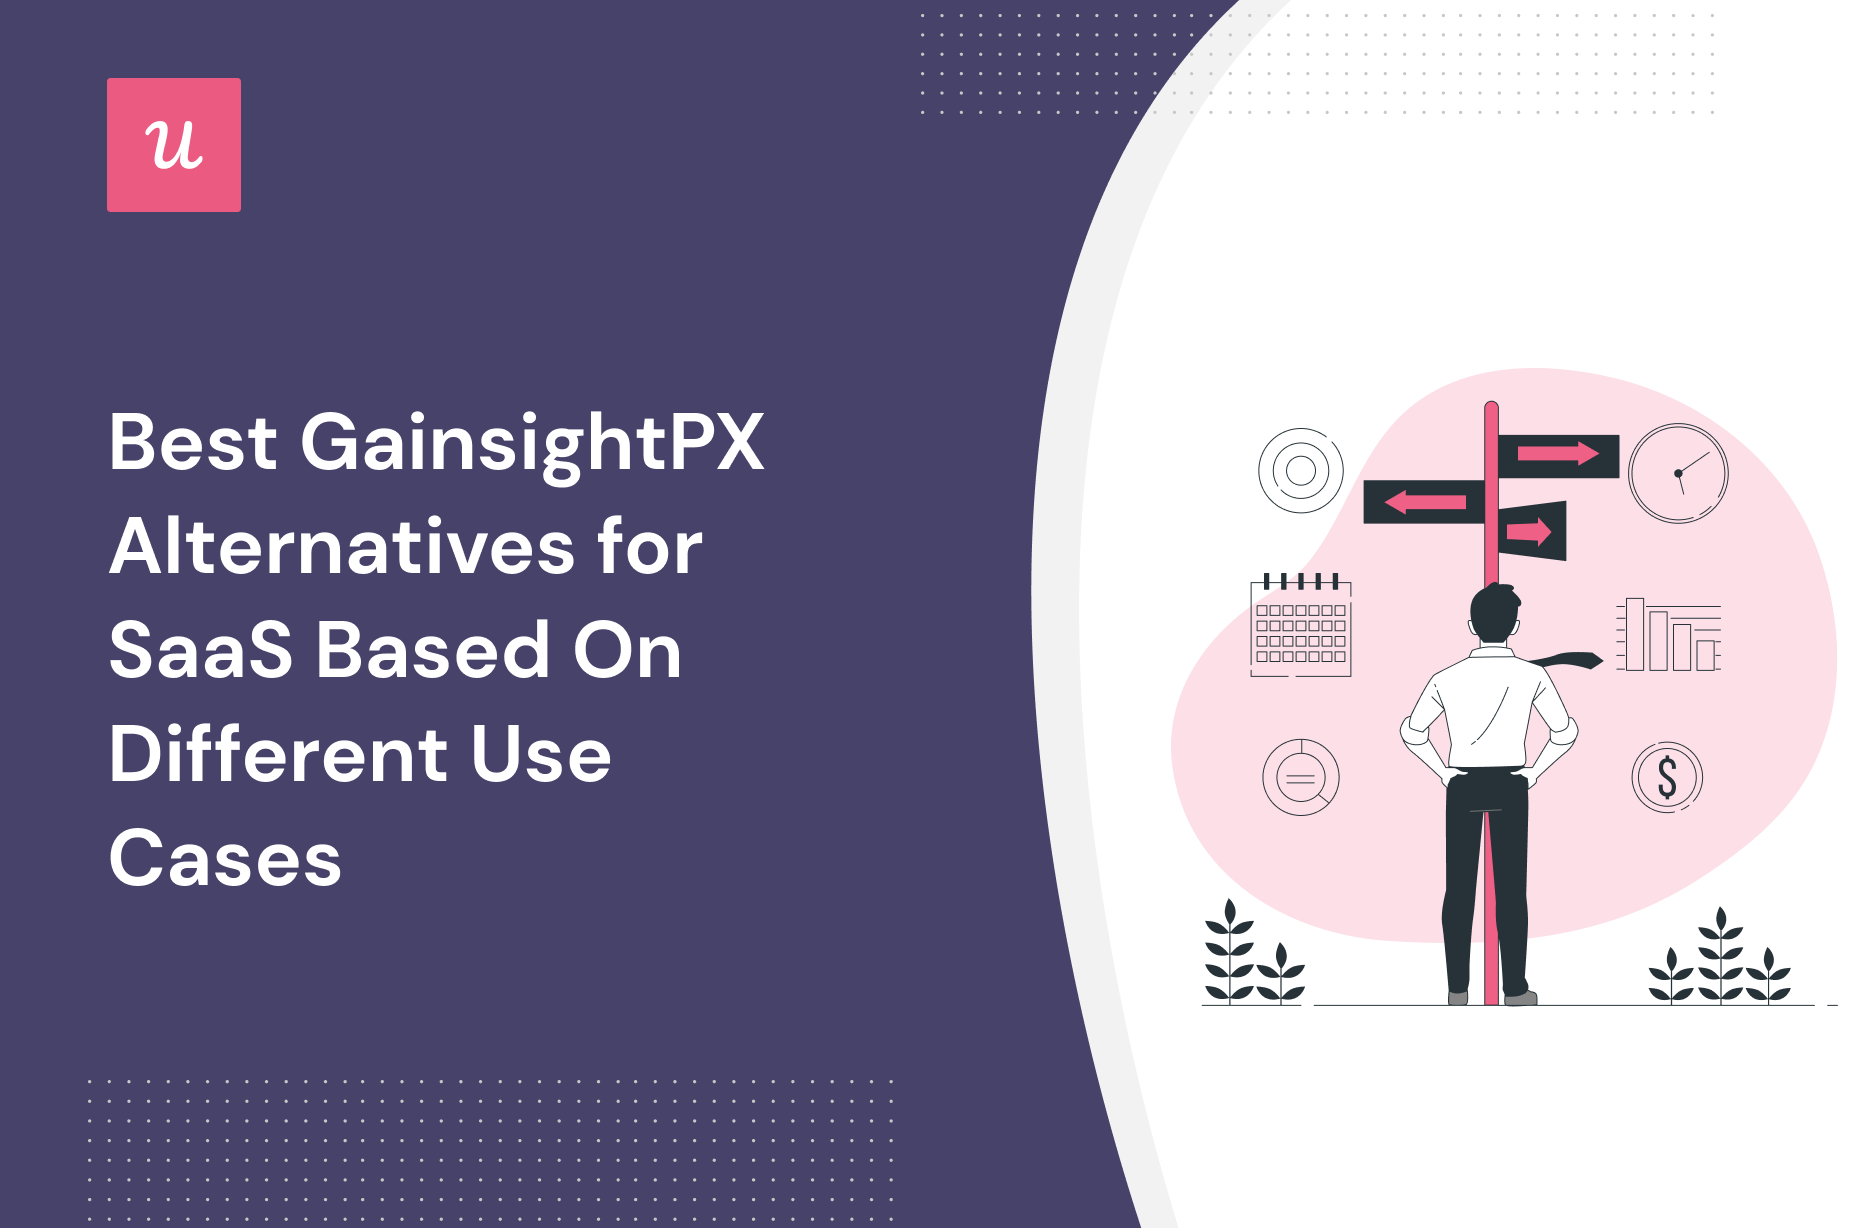 Best GainsightPX Alternatives for SaaS Based On Different Use Cases